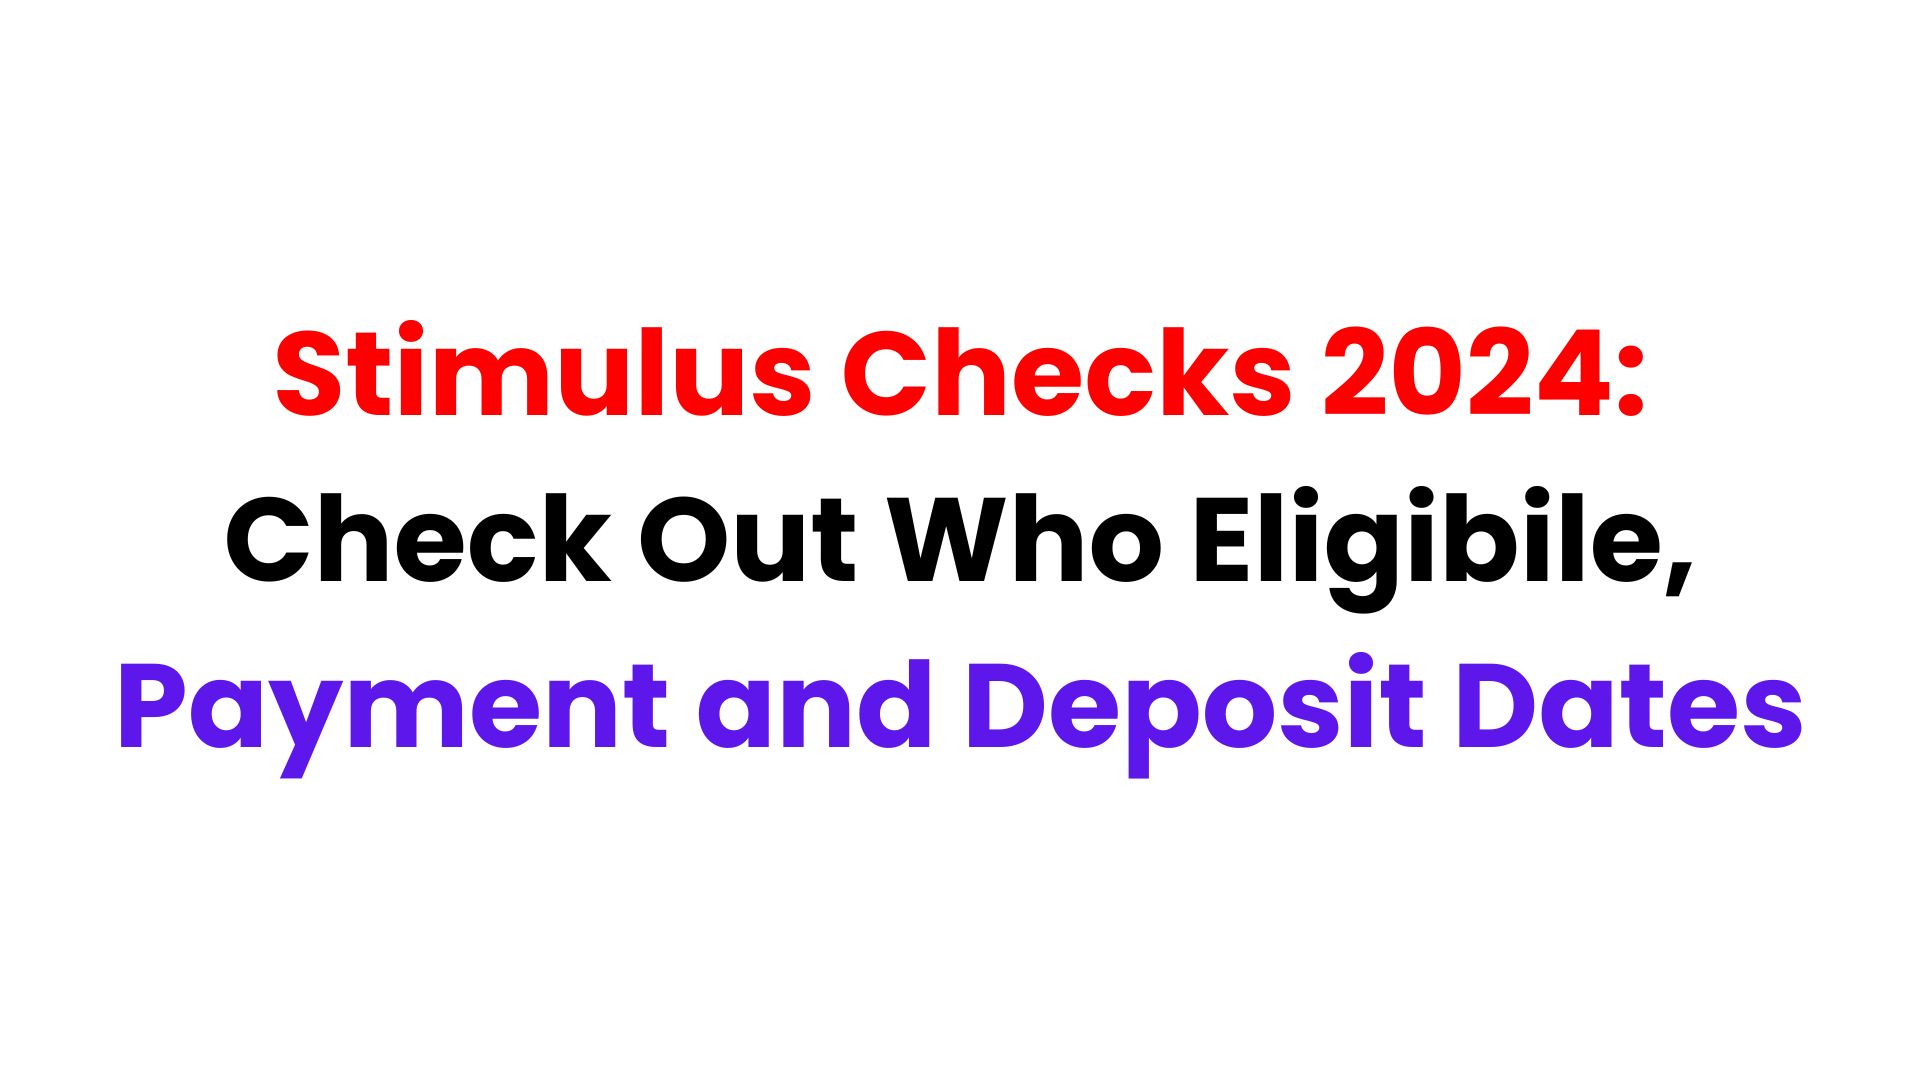 Stimulus Checks 2024: Check Out Who Eligibile, Payment and Deposit Dates